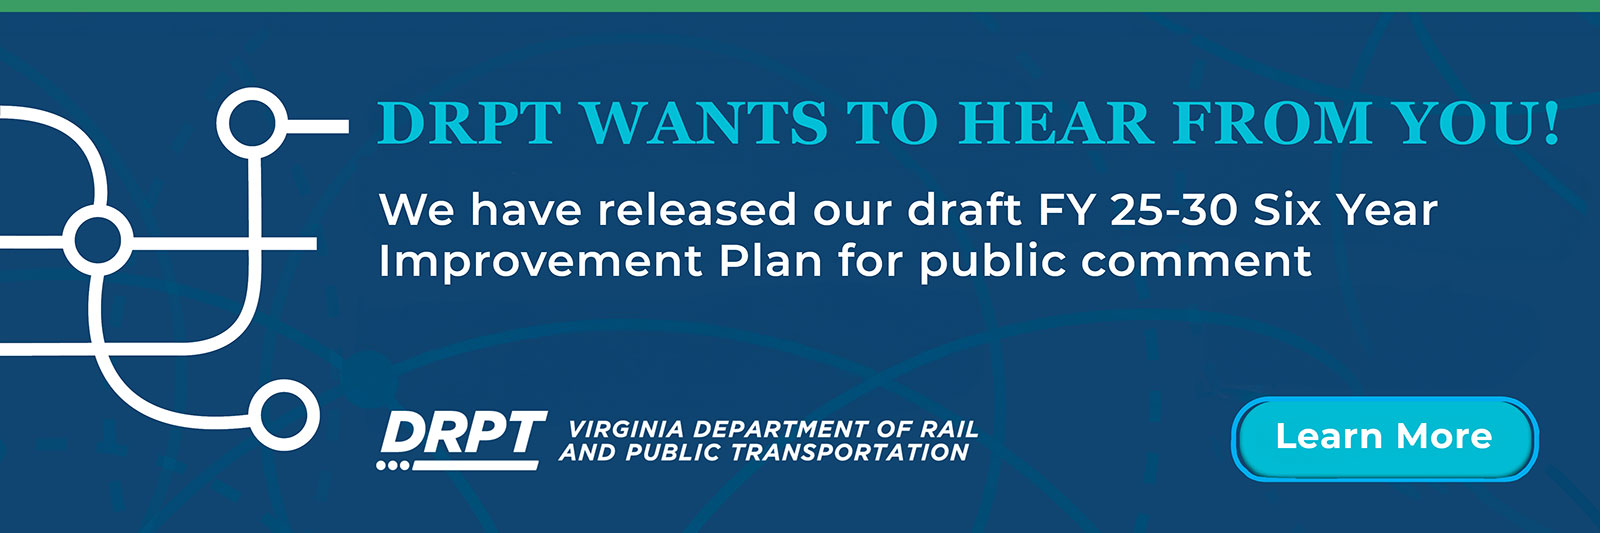 DRPT WANTS TO HEAR FROM YOU! We have released our draft FY 25-30 Six Year Improvement Plan for public comment. Learn More